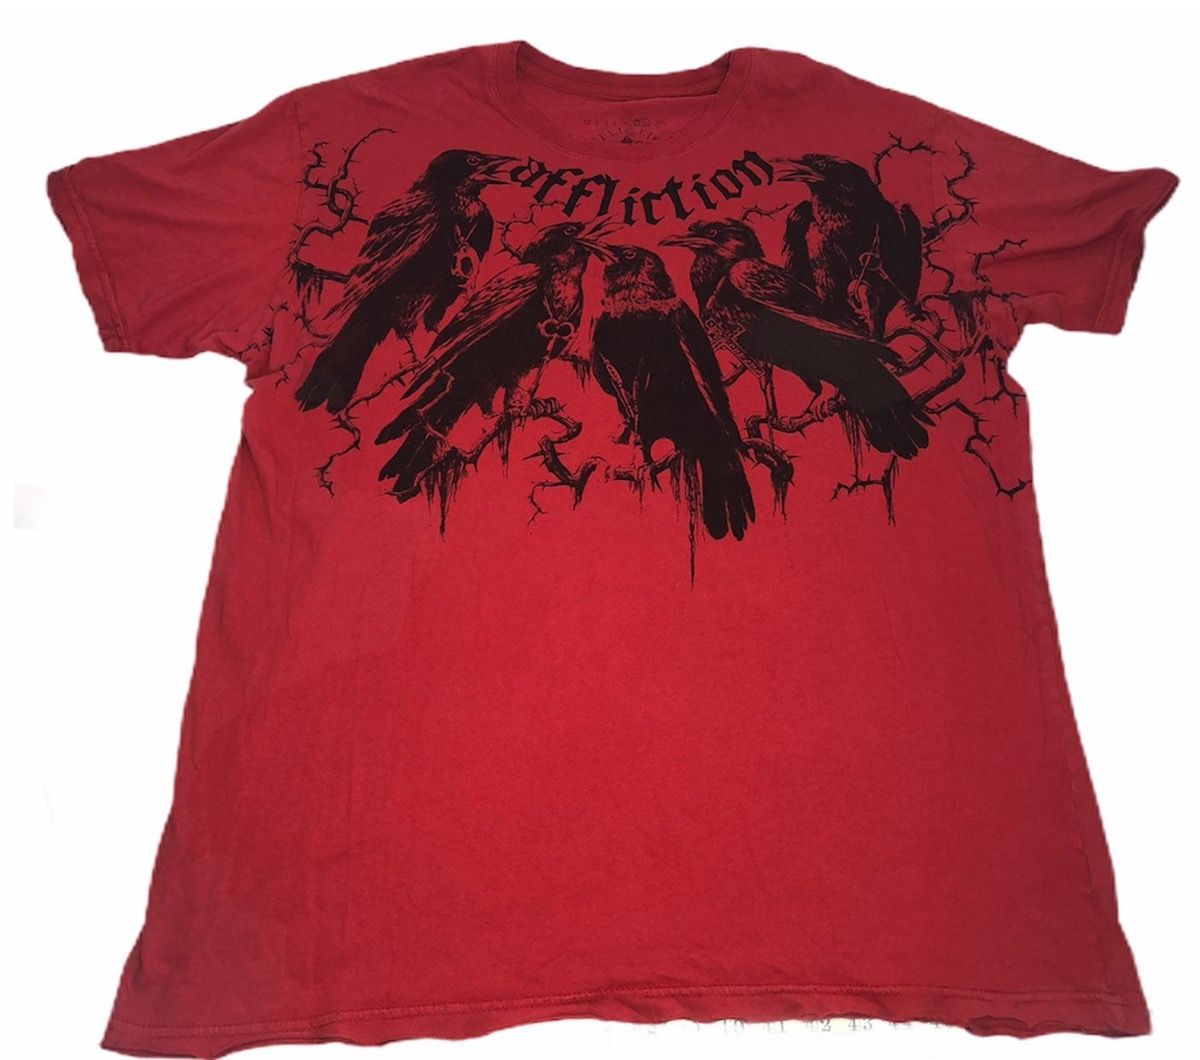 Affliction SEMATARY “GRAVE HOUSE” AFFLICTION TEE Size US XXL / EU 58 / 5 - 1 Preview